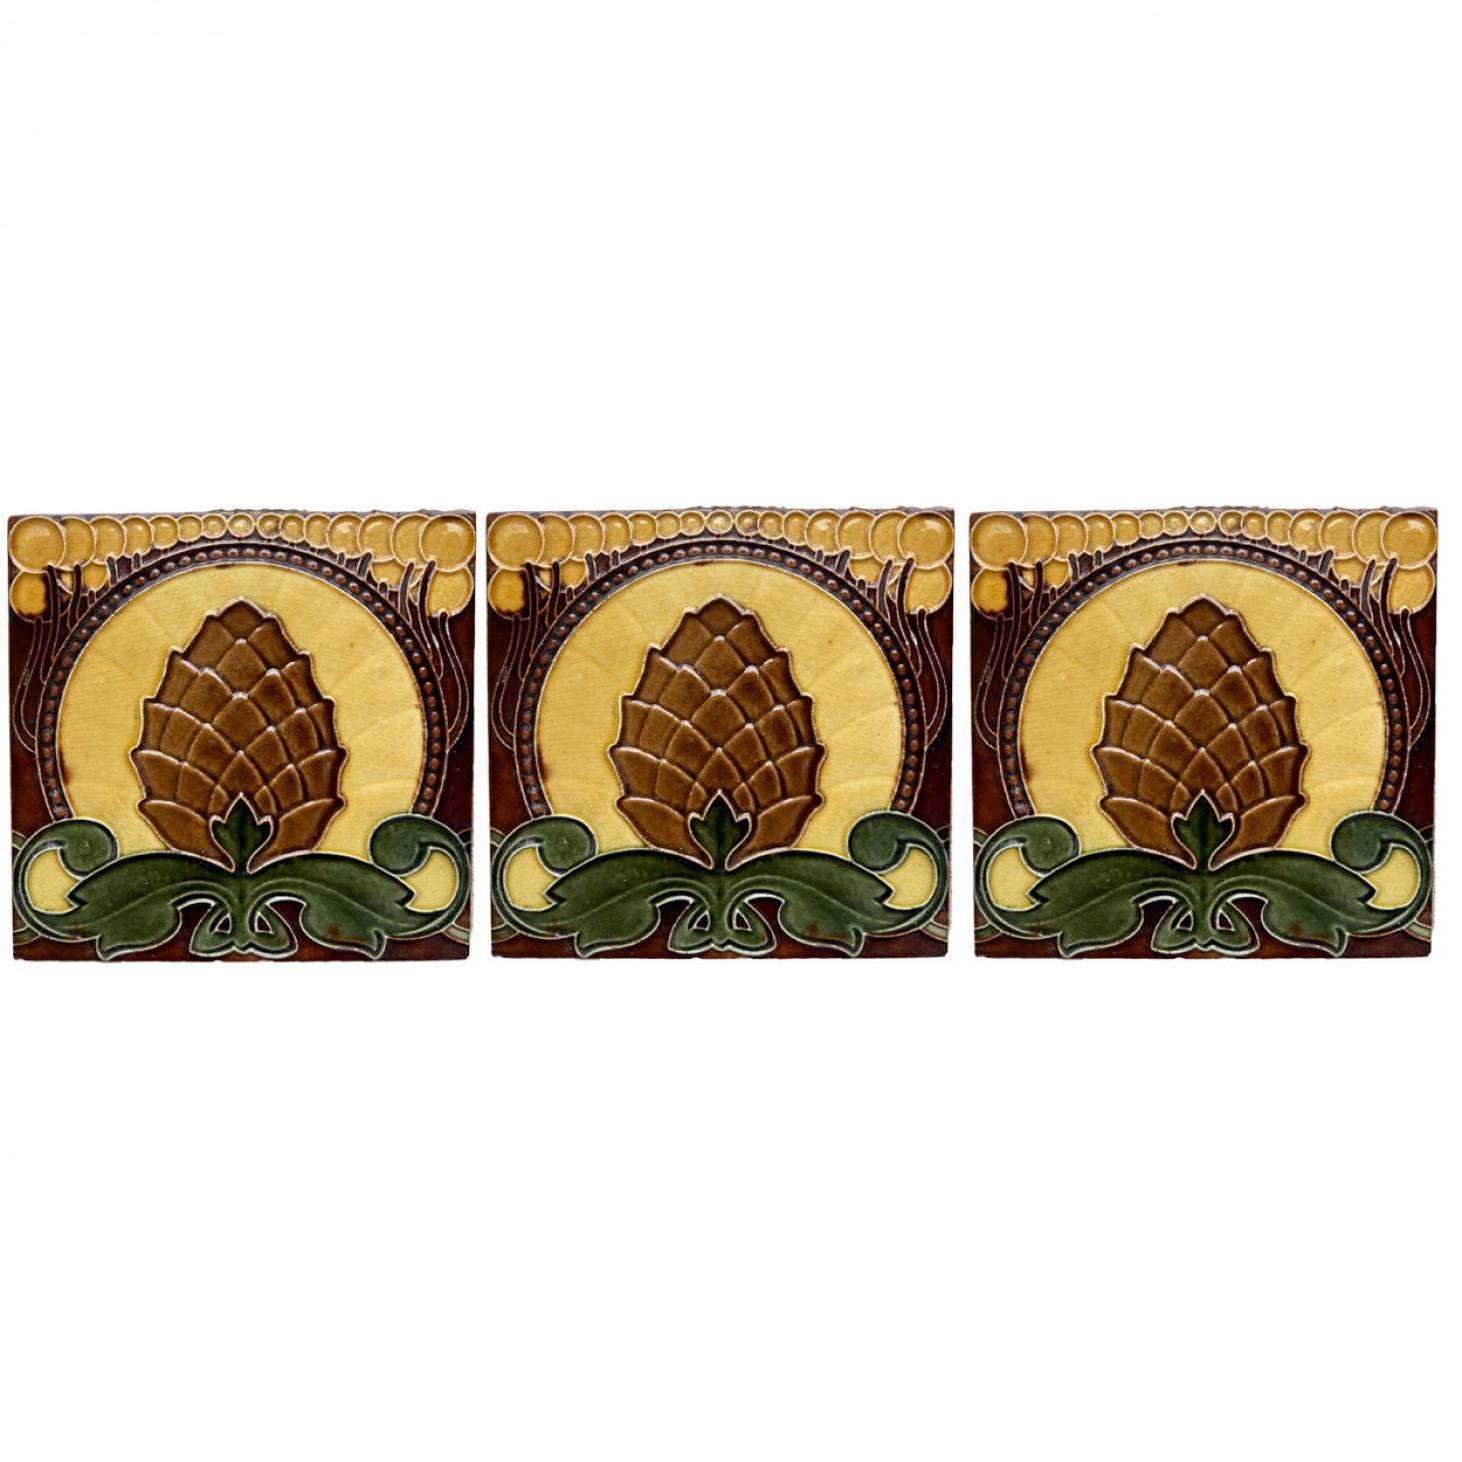 Handmade border tiles in warm yellow, green and brown colors. With an illustration in relief of a pine cone. Manufactured around 1920 by Le Glaive, Belgium.

We have different brown glazed edges (as shown in the images), which complete the